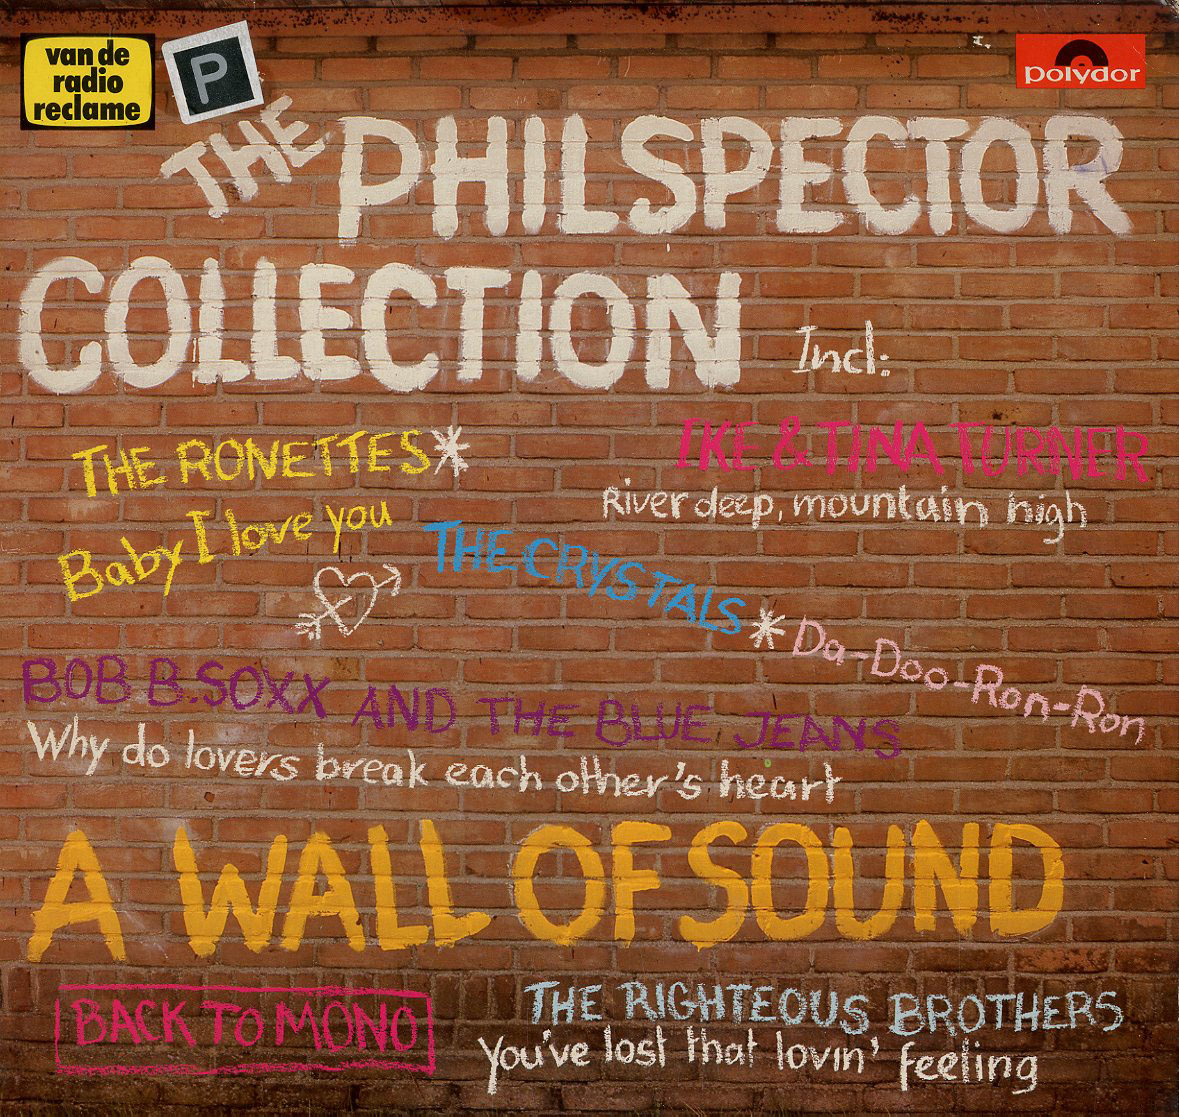 Albumcover Phil Spector Sampler - The Phil Spector Collection - A Wall Of Sound